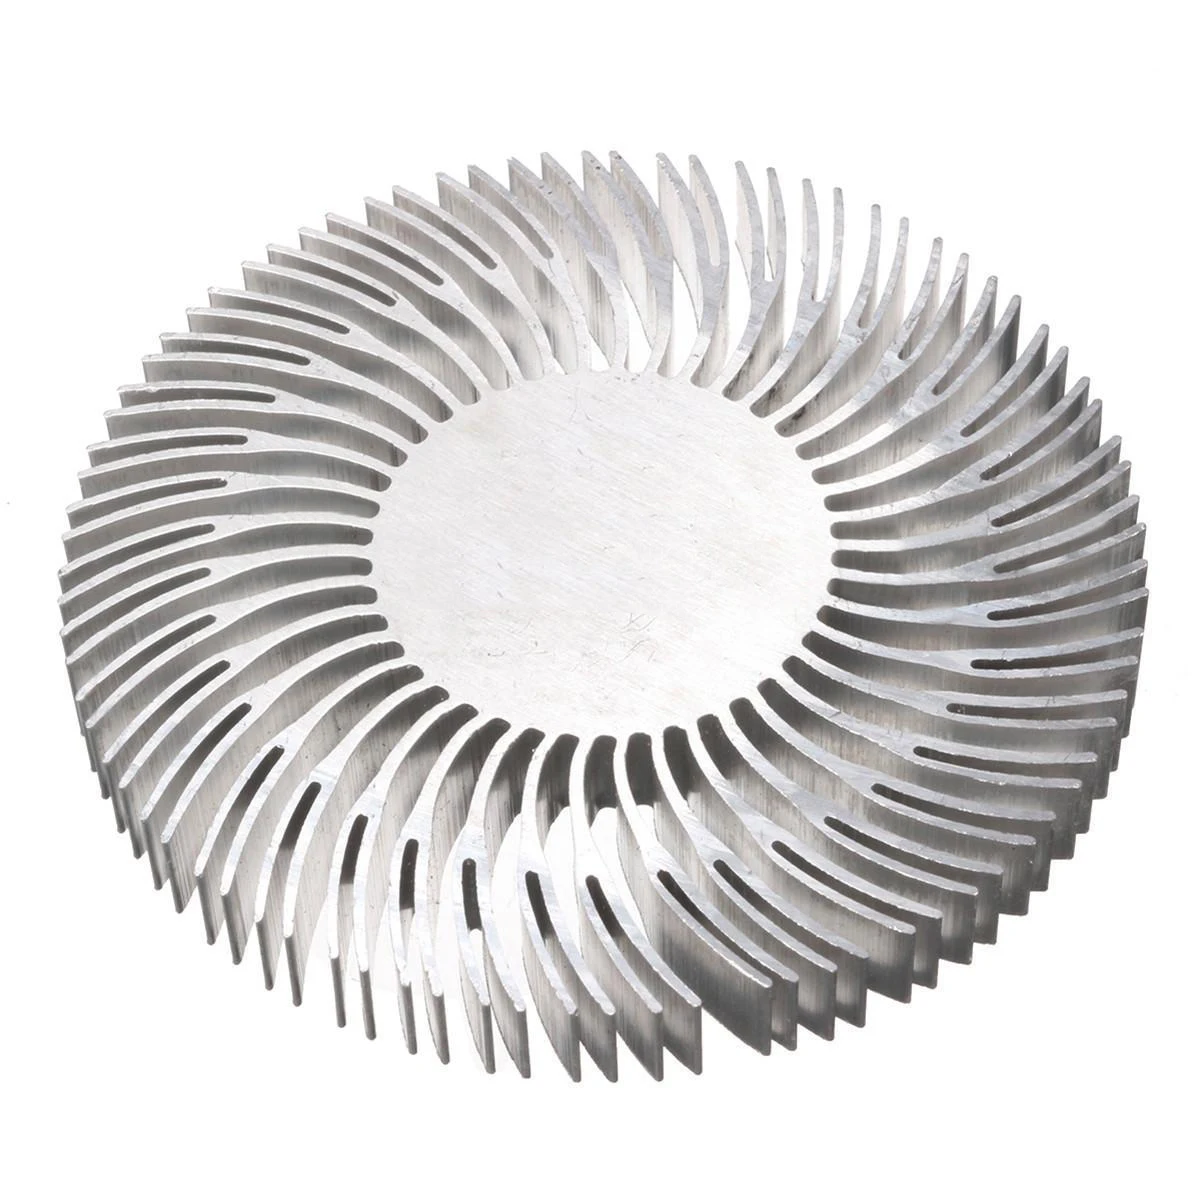 1pc Round Spiral Aluminum Heat Sink Radiator 90*10mm With 6pcs Screws For 10W High Power LED Lamp Heat Dissipation Mayitr